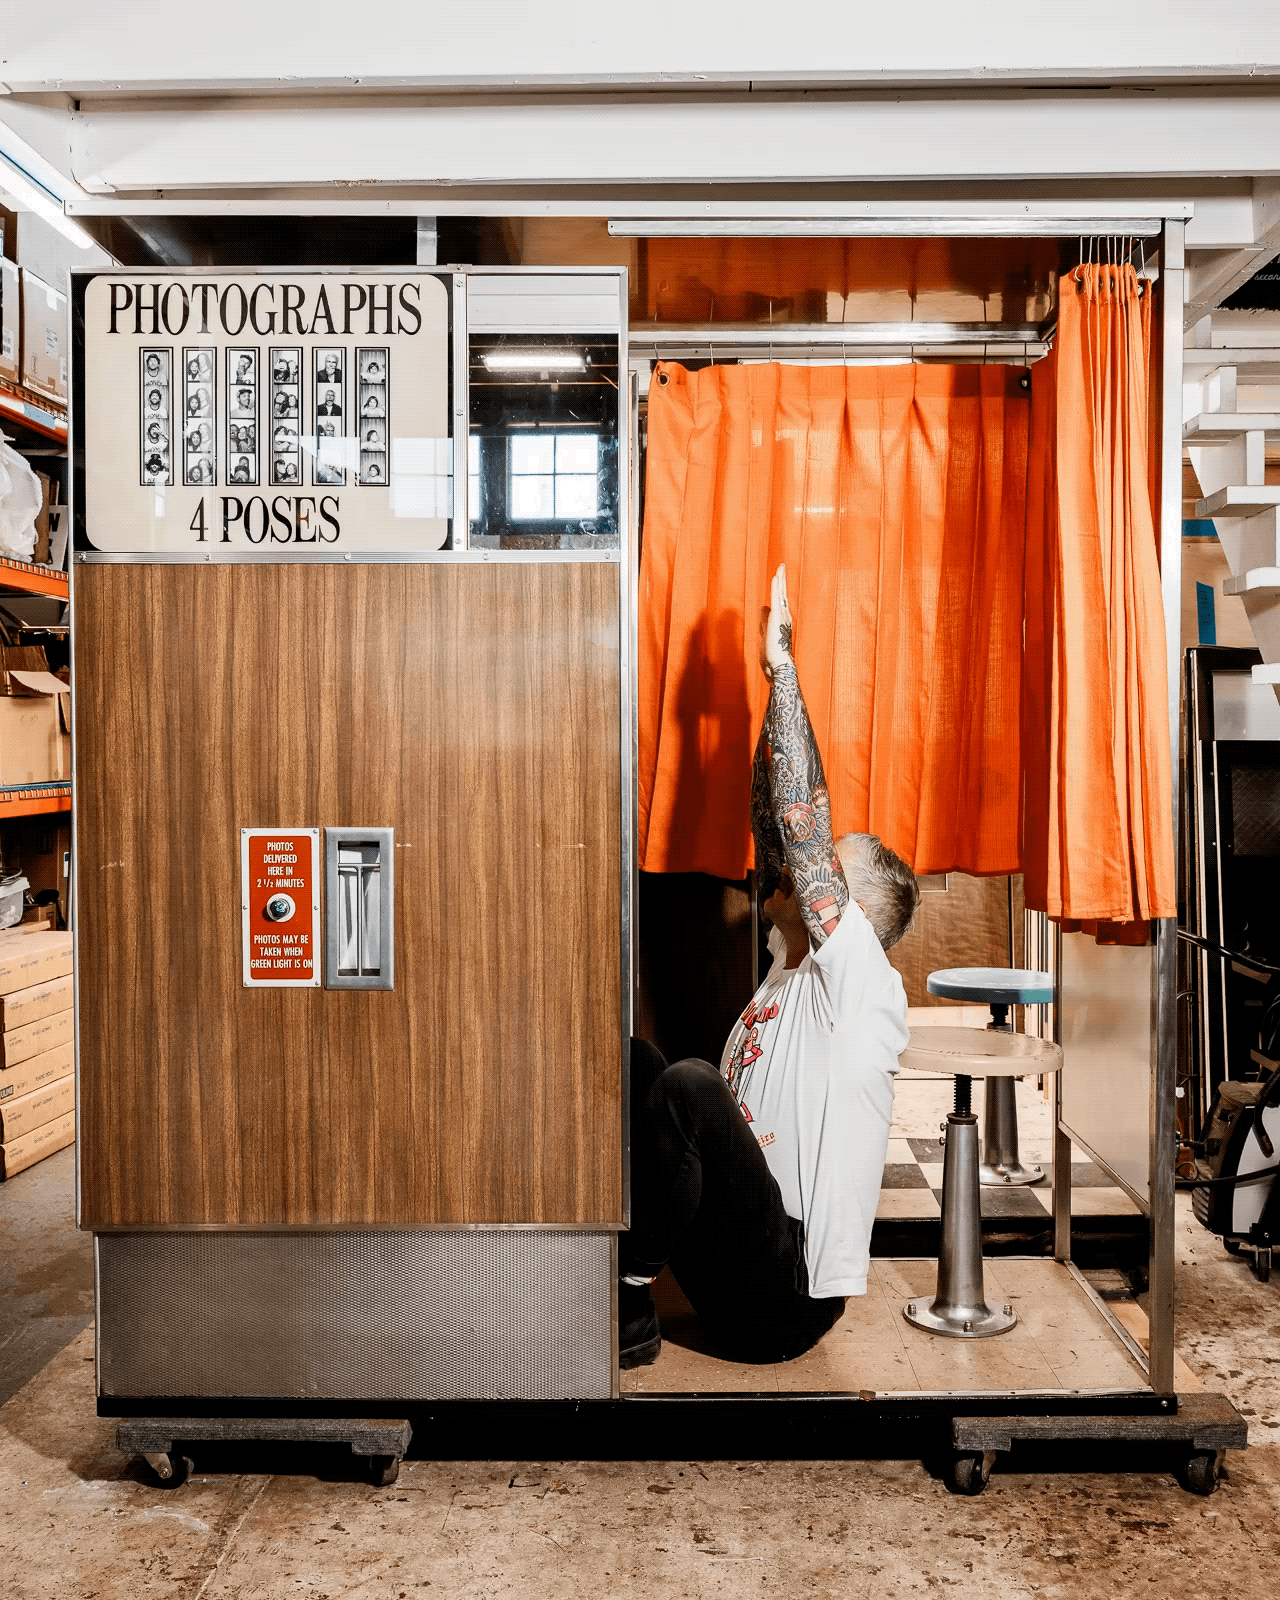 A person with tattooed arms, wearing a white shirt, is sitting and stretching inside a vintage photo booth with an orange curtain, in an industrial setting.